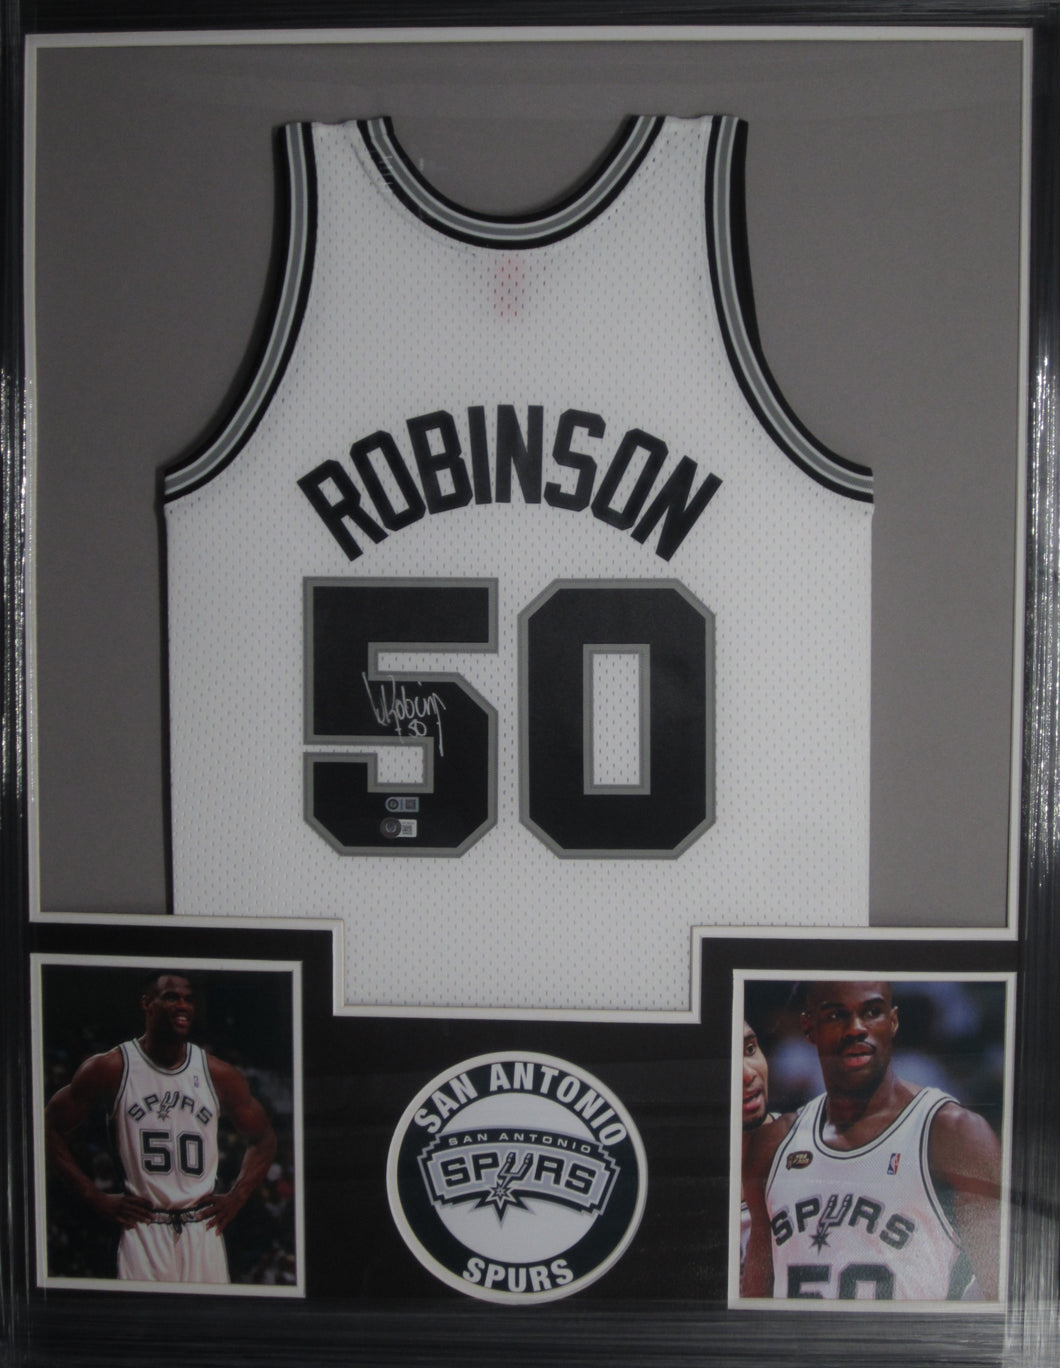 San Antonio Spurs David Robinson Signed Jersey Framed & Matted with BECKETT COA